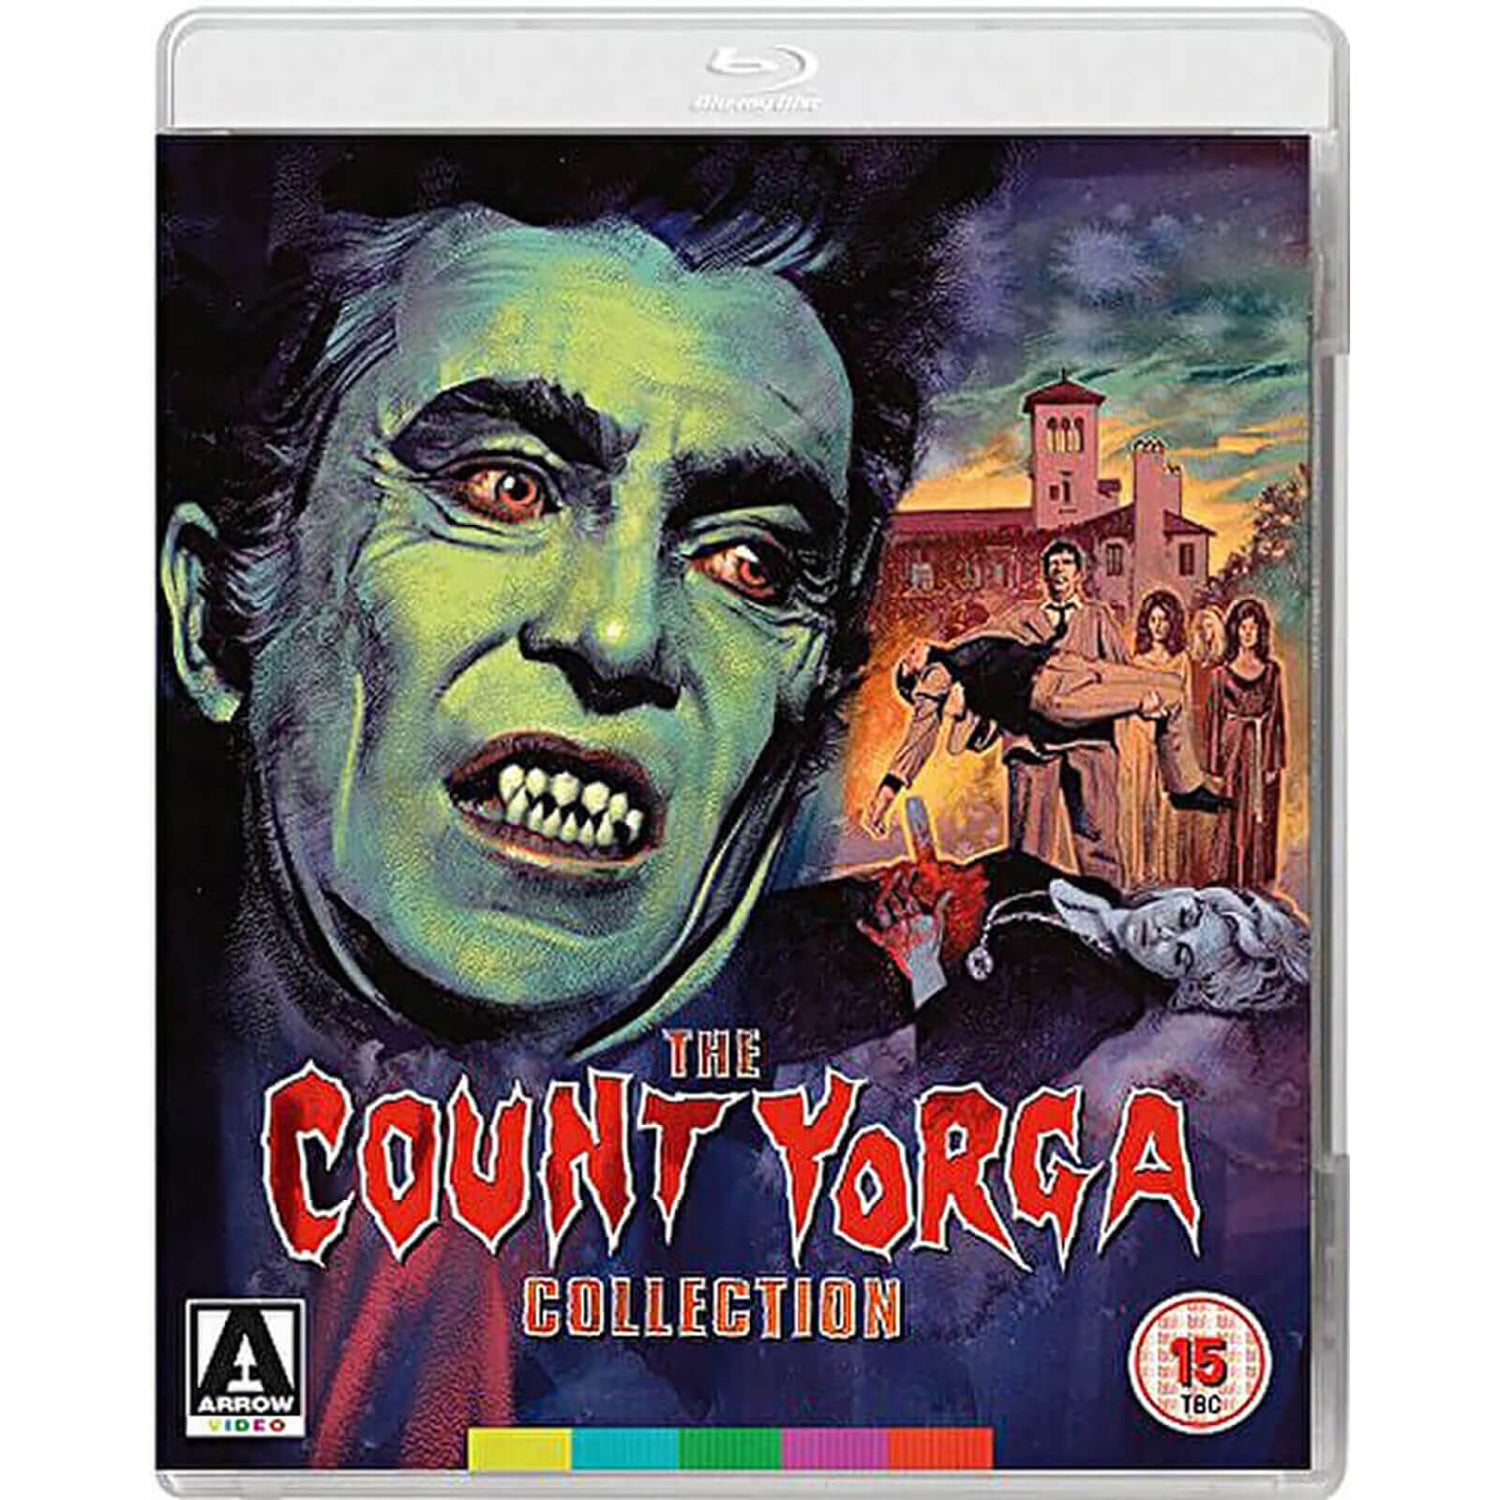 The Count Yorga Collection Blu-ray